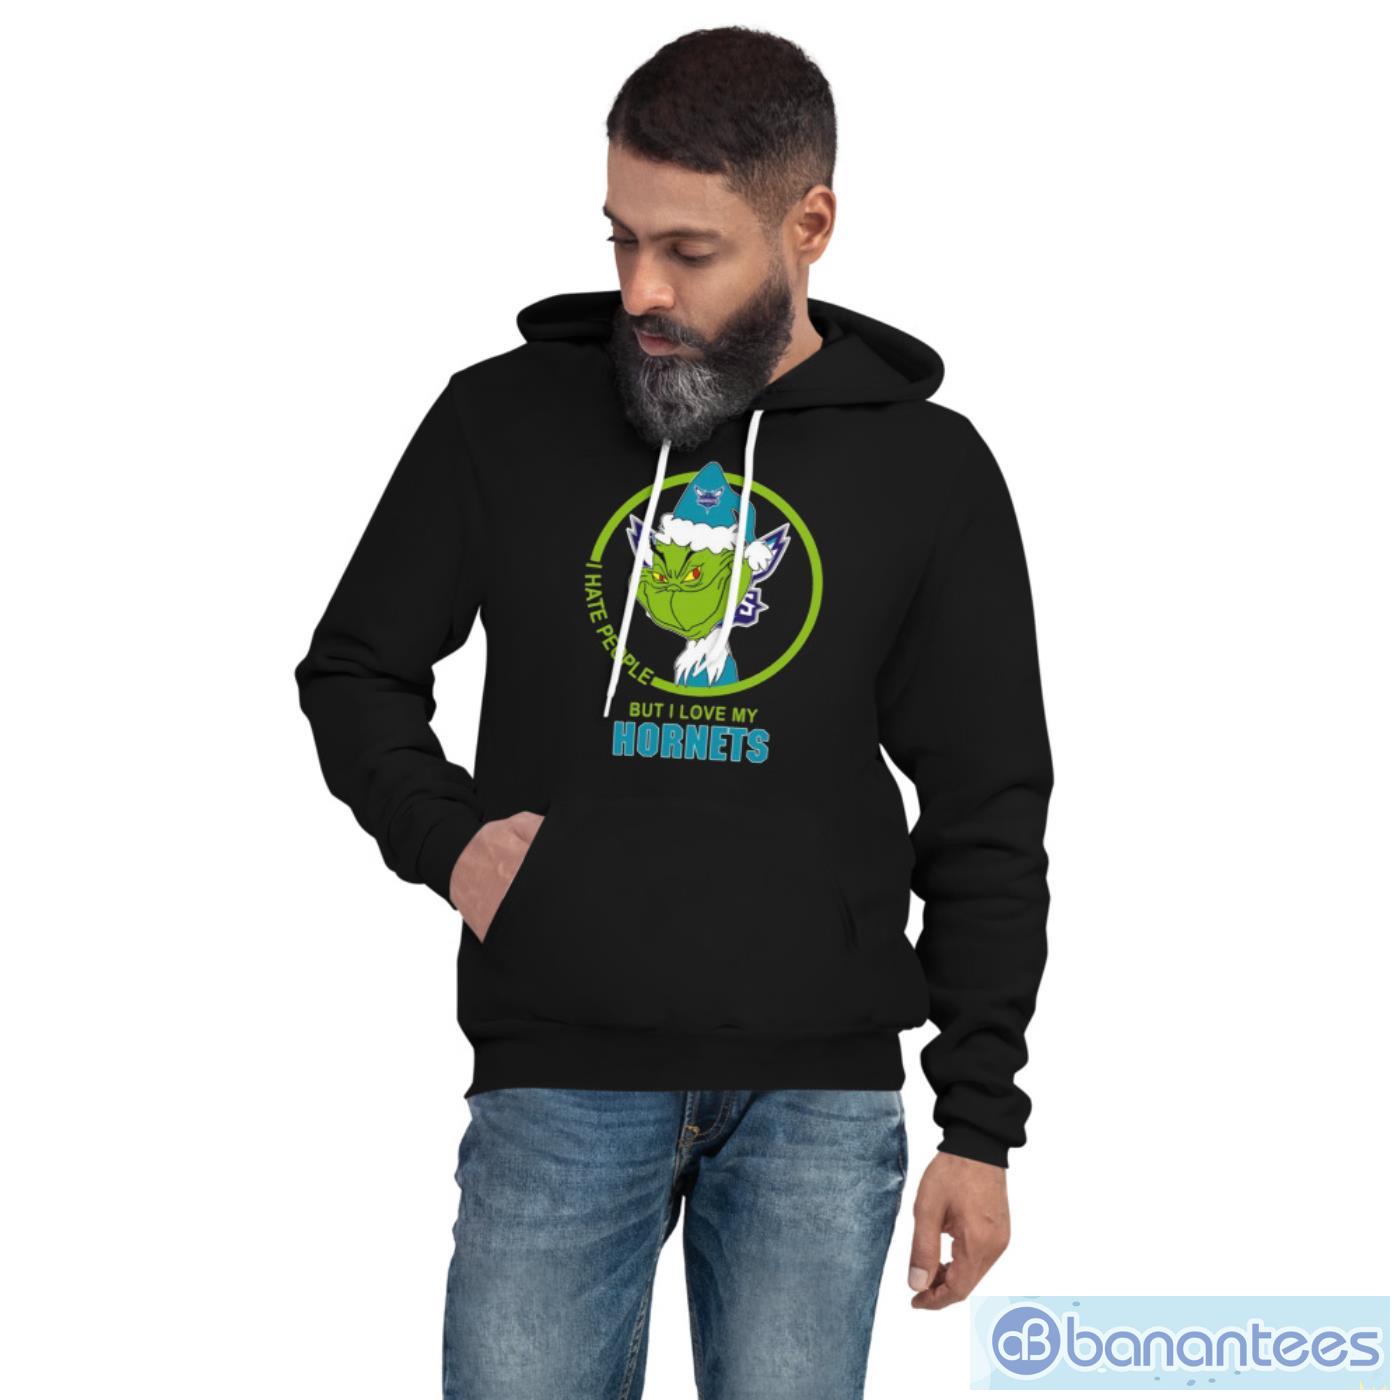 Charlotte Hornets NBA Christmas Grinch I Hate People But I Love My Favorite Basketball Team T Shirt - Unisex Fleece Pullover Hoodie